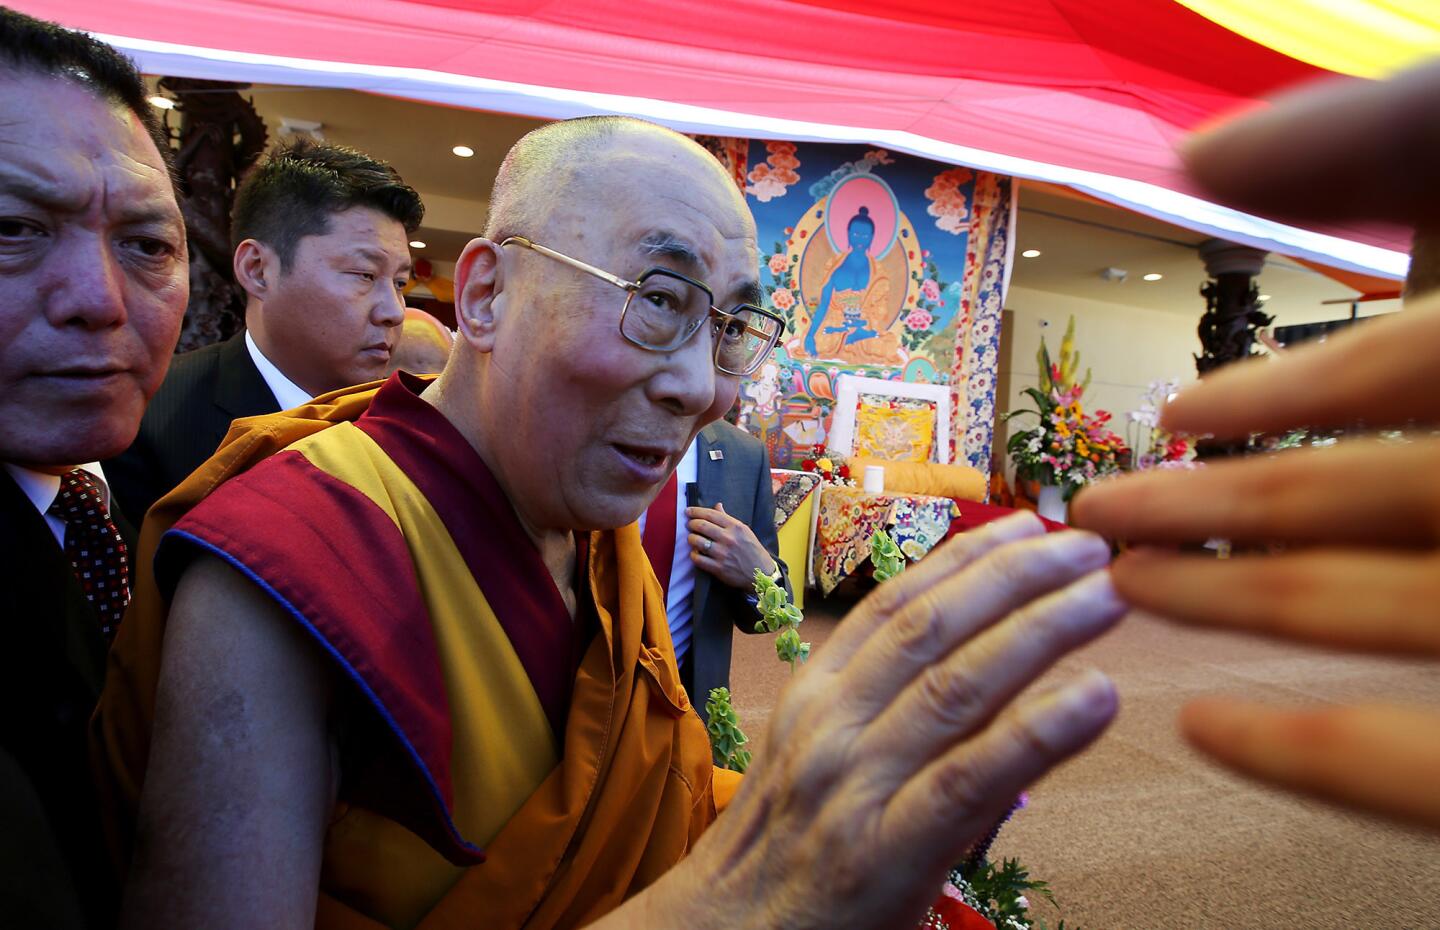 The Dalai Lama greets people during the opening of Chua Dieu Ngu Buddhist temple in Westminster on Saturday.